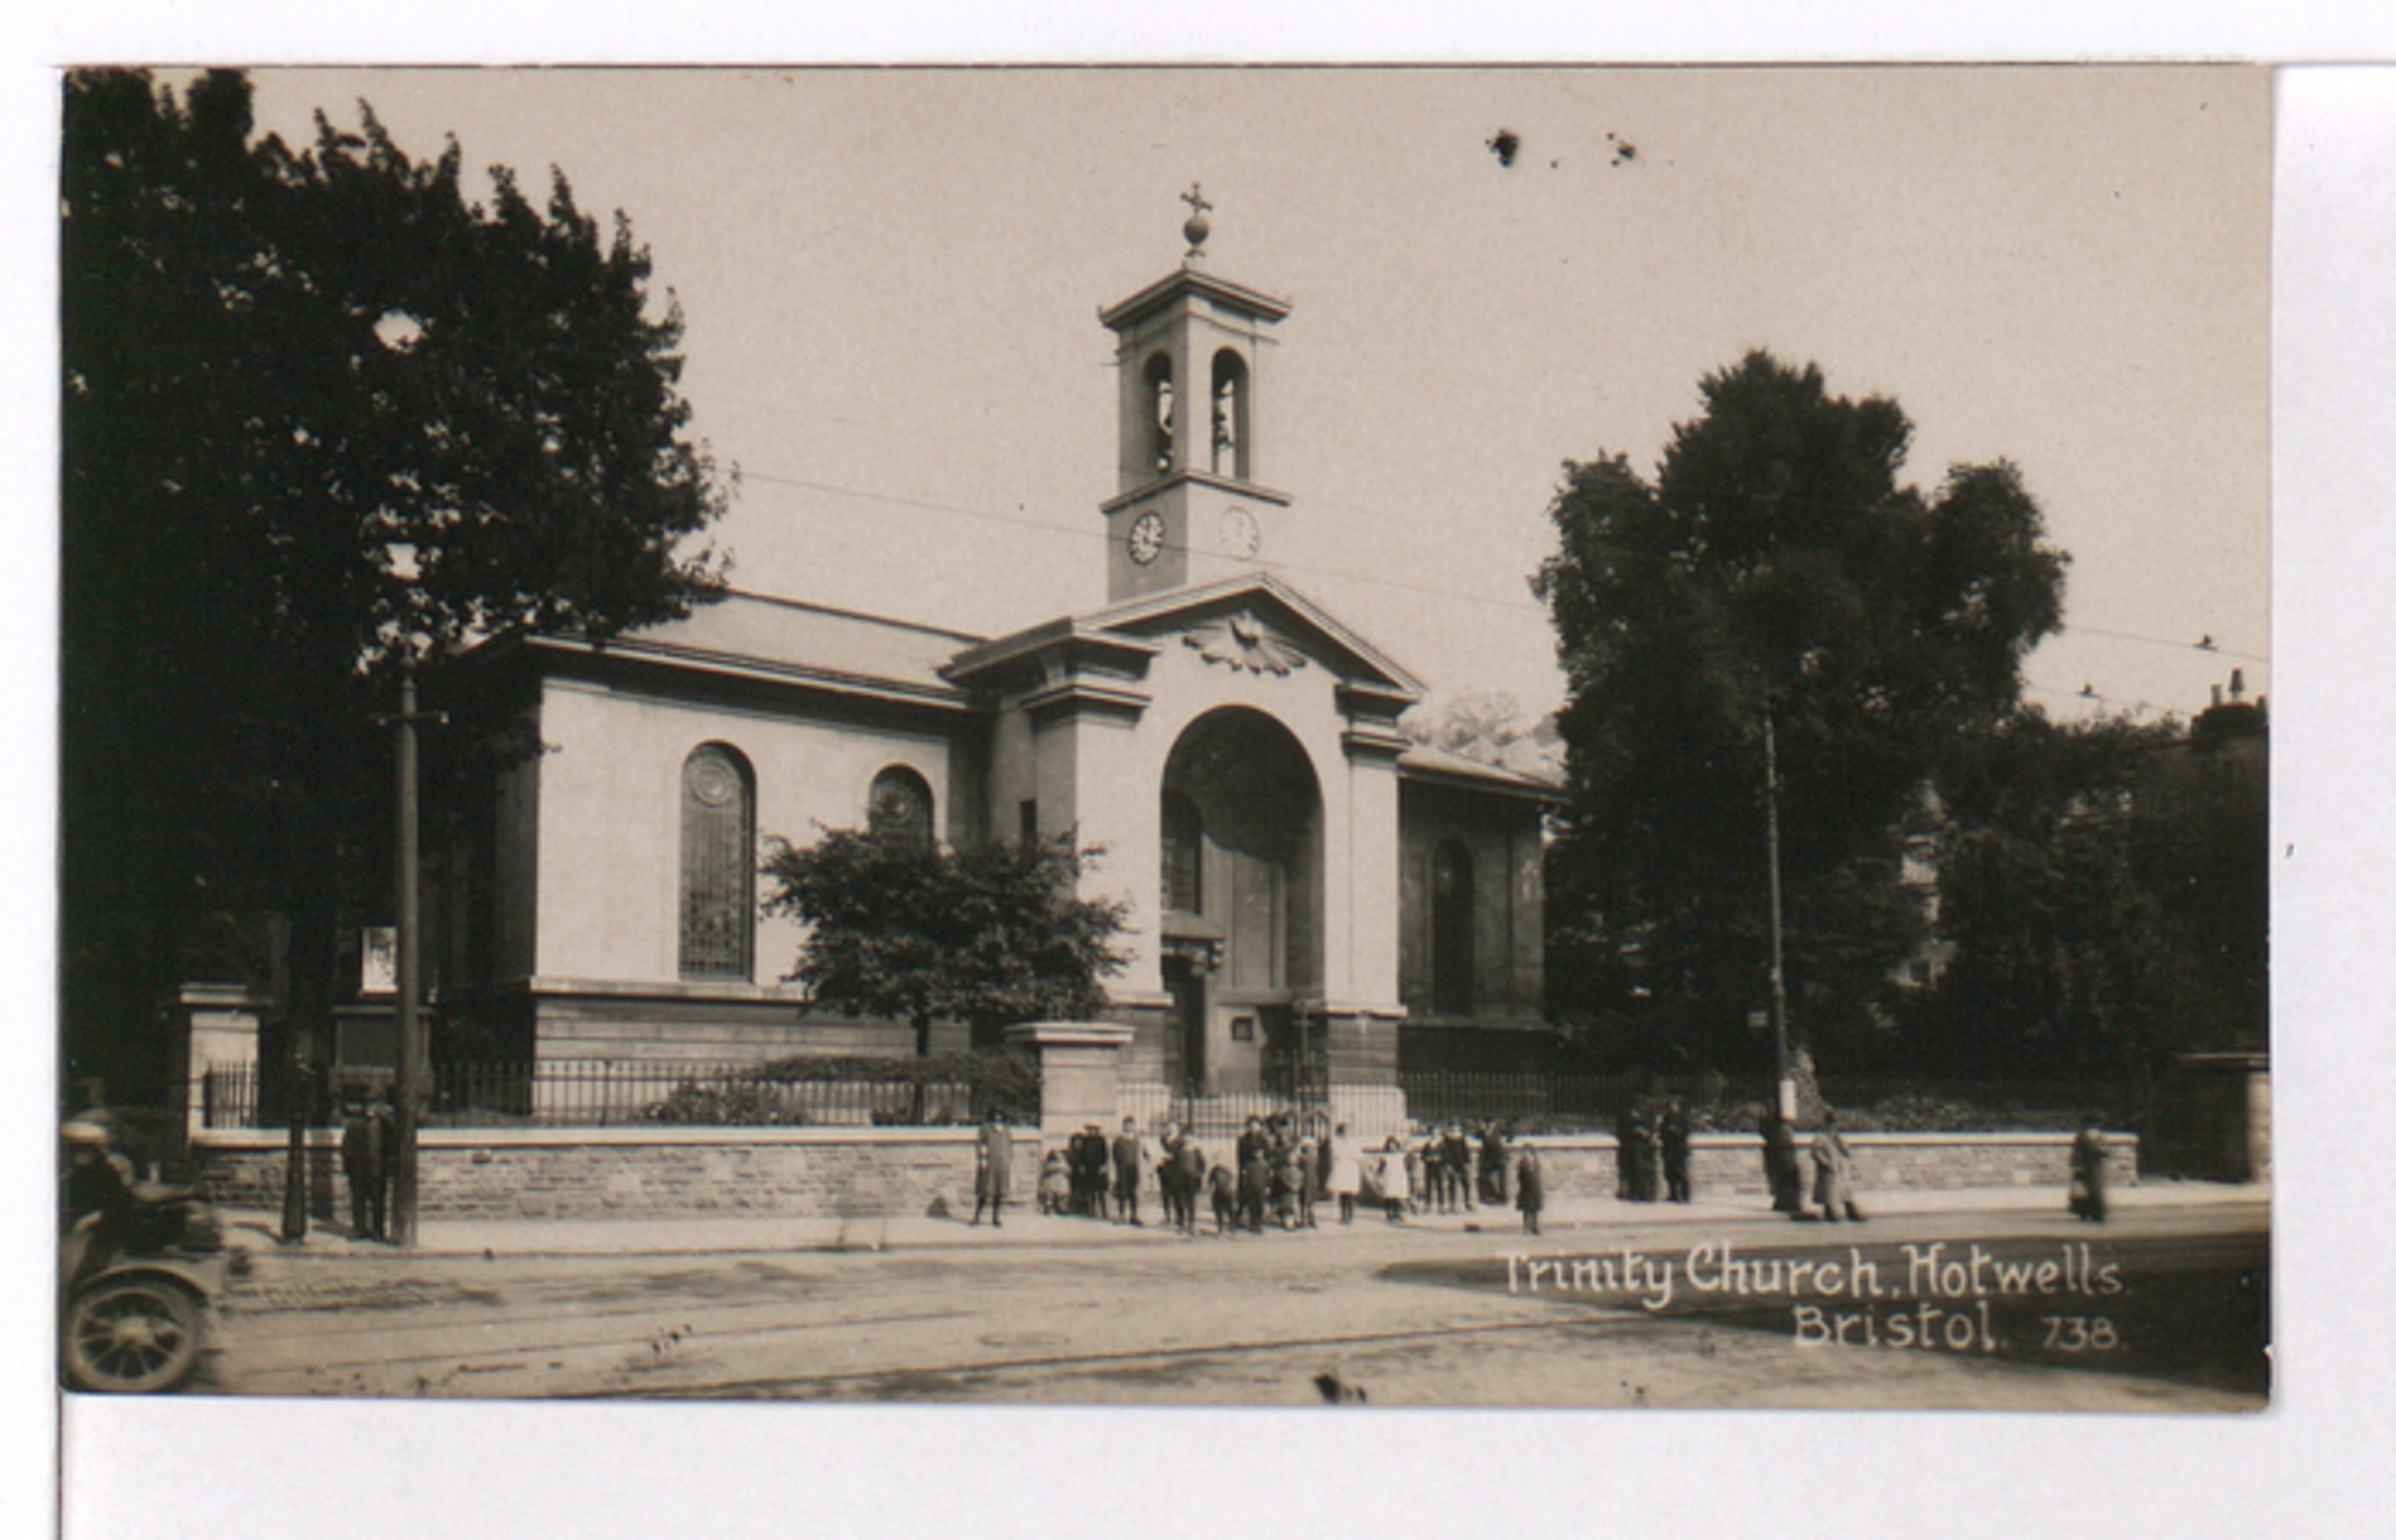 Holy Trinity Before
1920s image from the Vaughn Collection.
